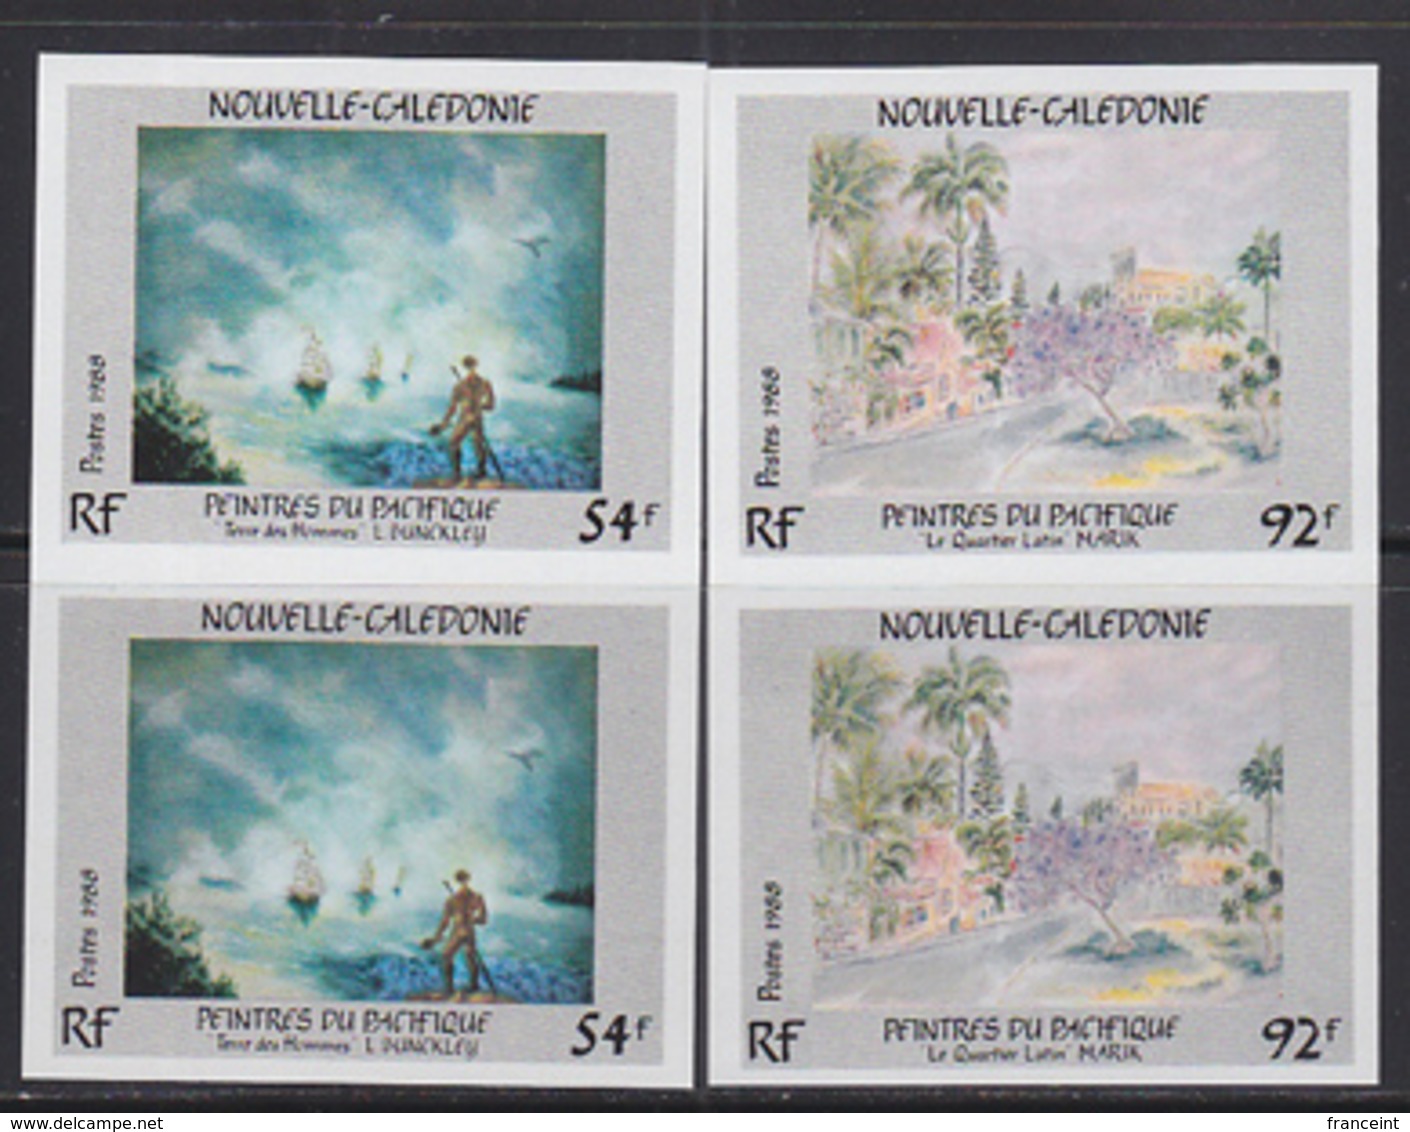 NEW CALEDONIA (1988) Paintings By Caledonians. Set Of 2 Imperforate Pairs. Scott Nos 605-6, Yvert Nos 566-7. - Imperforates, Proofs & Errors